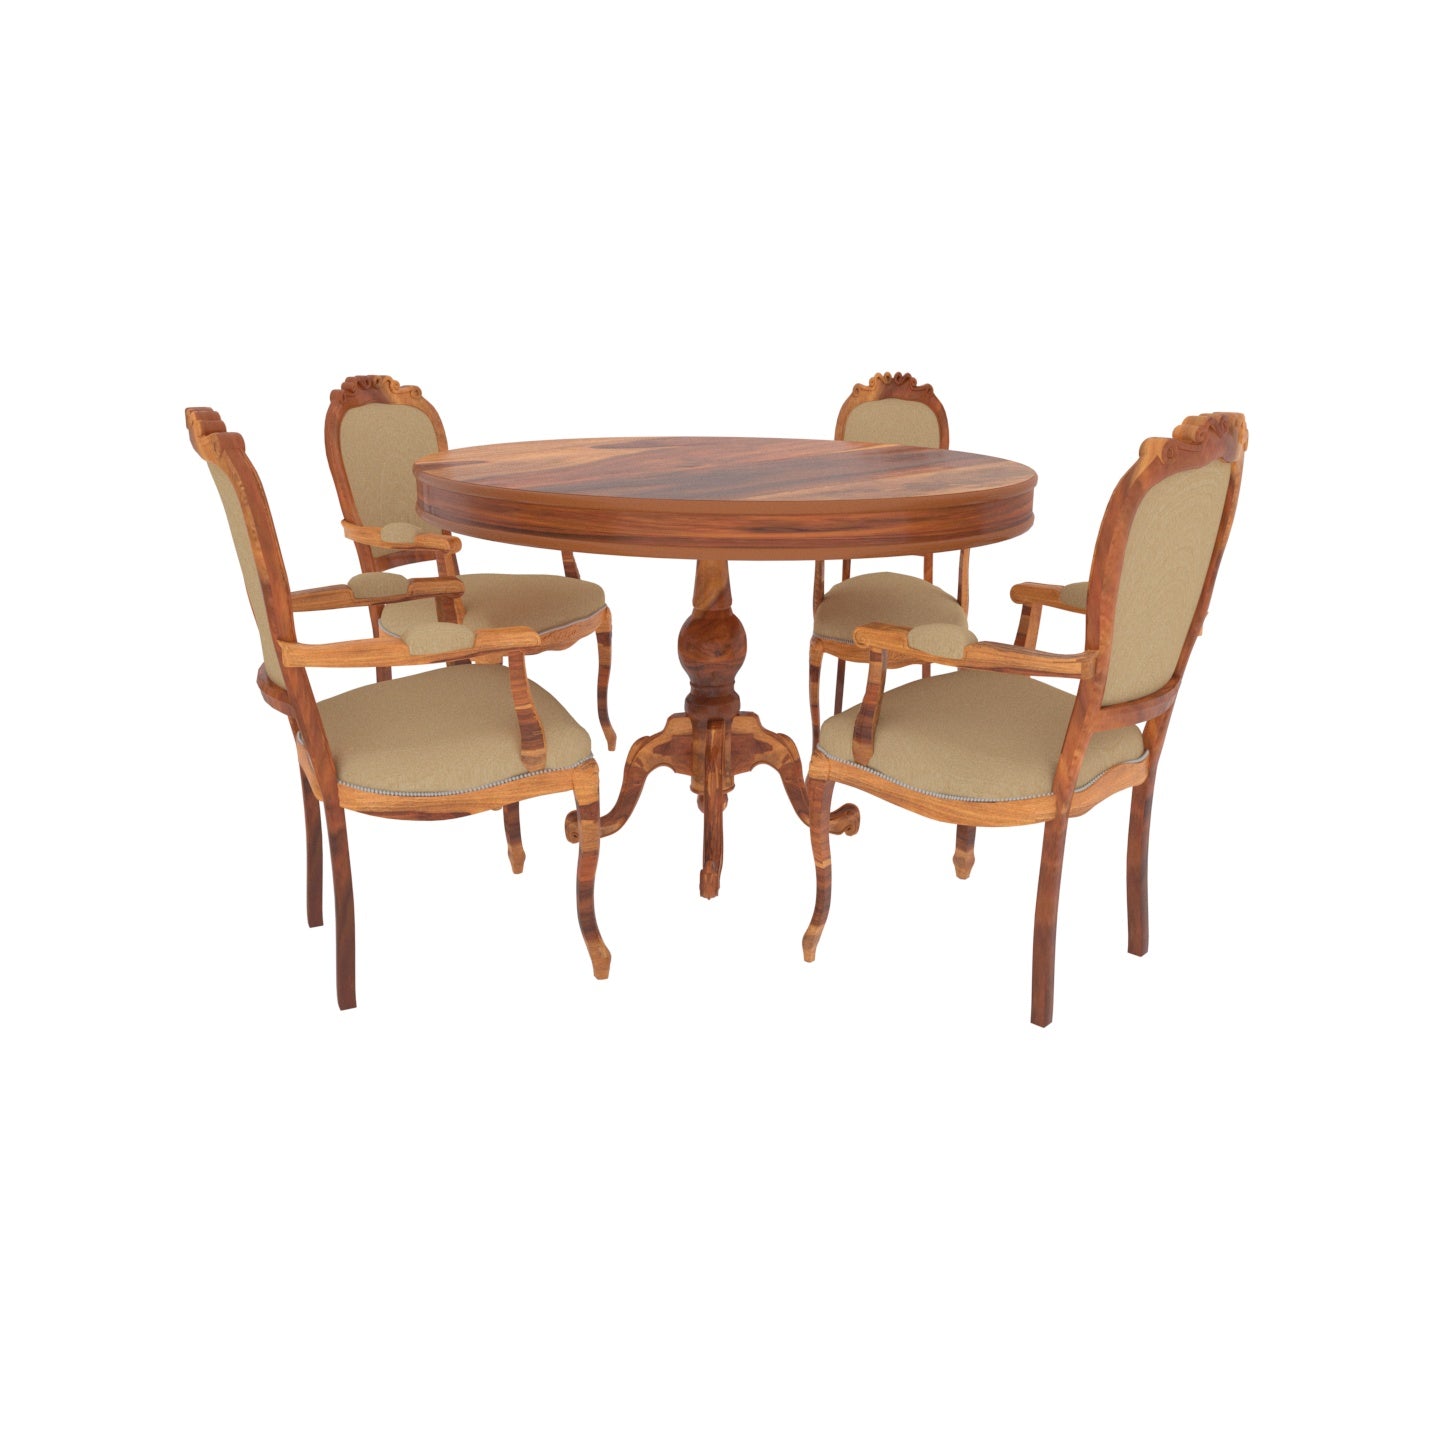 Truffle Art Four Chair Round Table Complete Dining set Dining Set